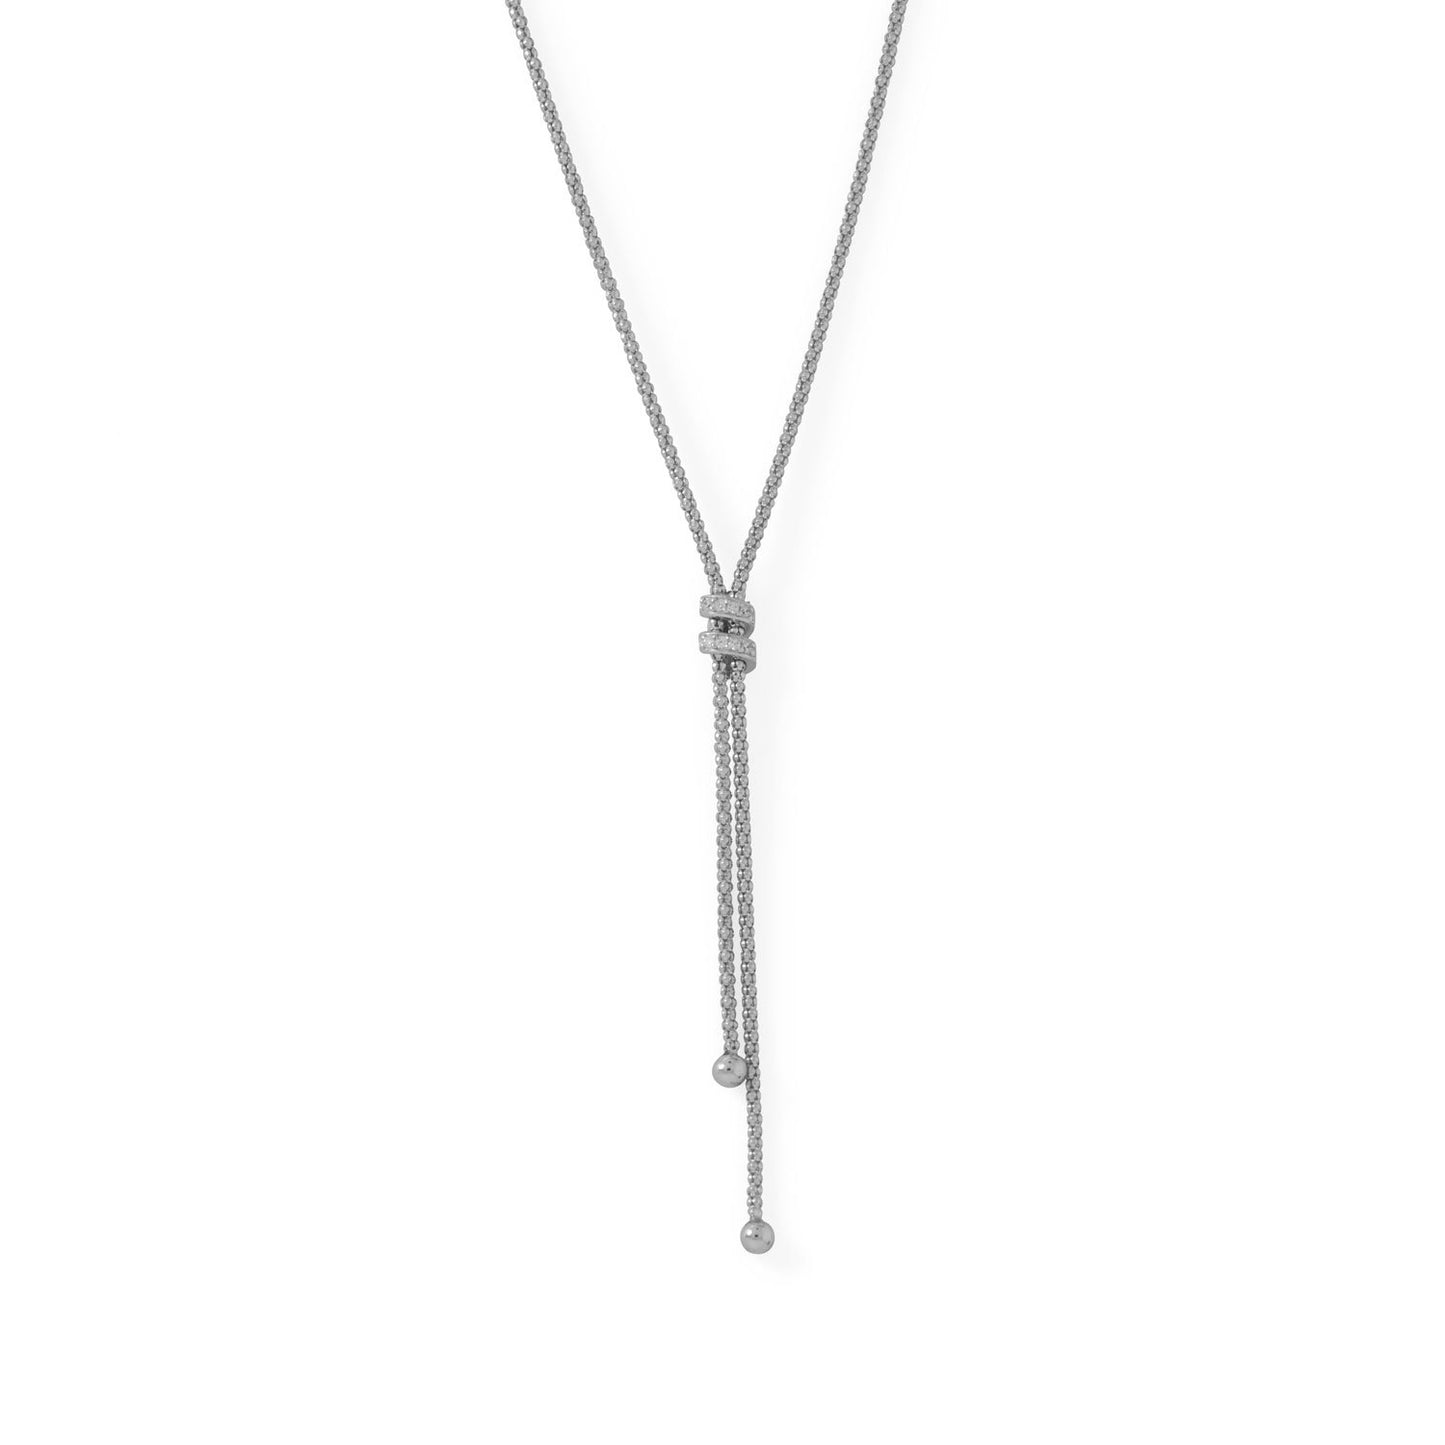 Rhodium Plated Sterling Silver Coreana and Cubic Zirconia Lariat Necklace